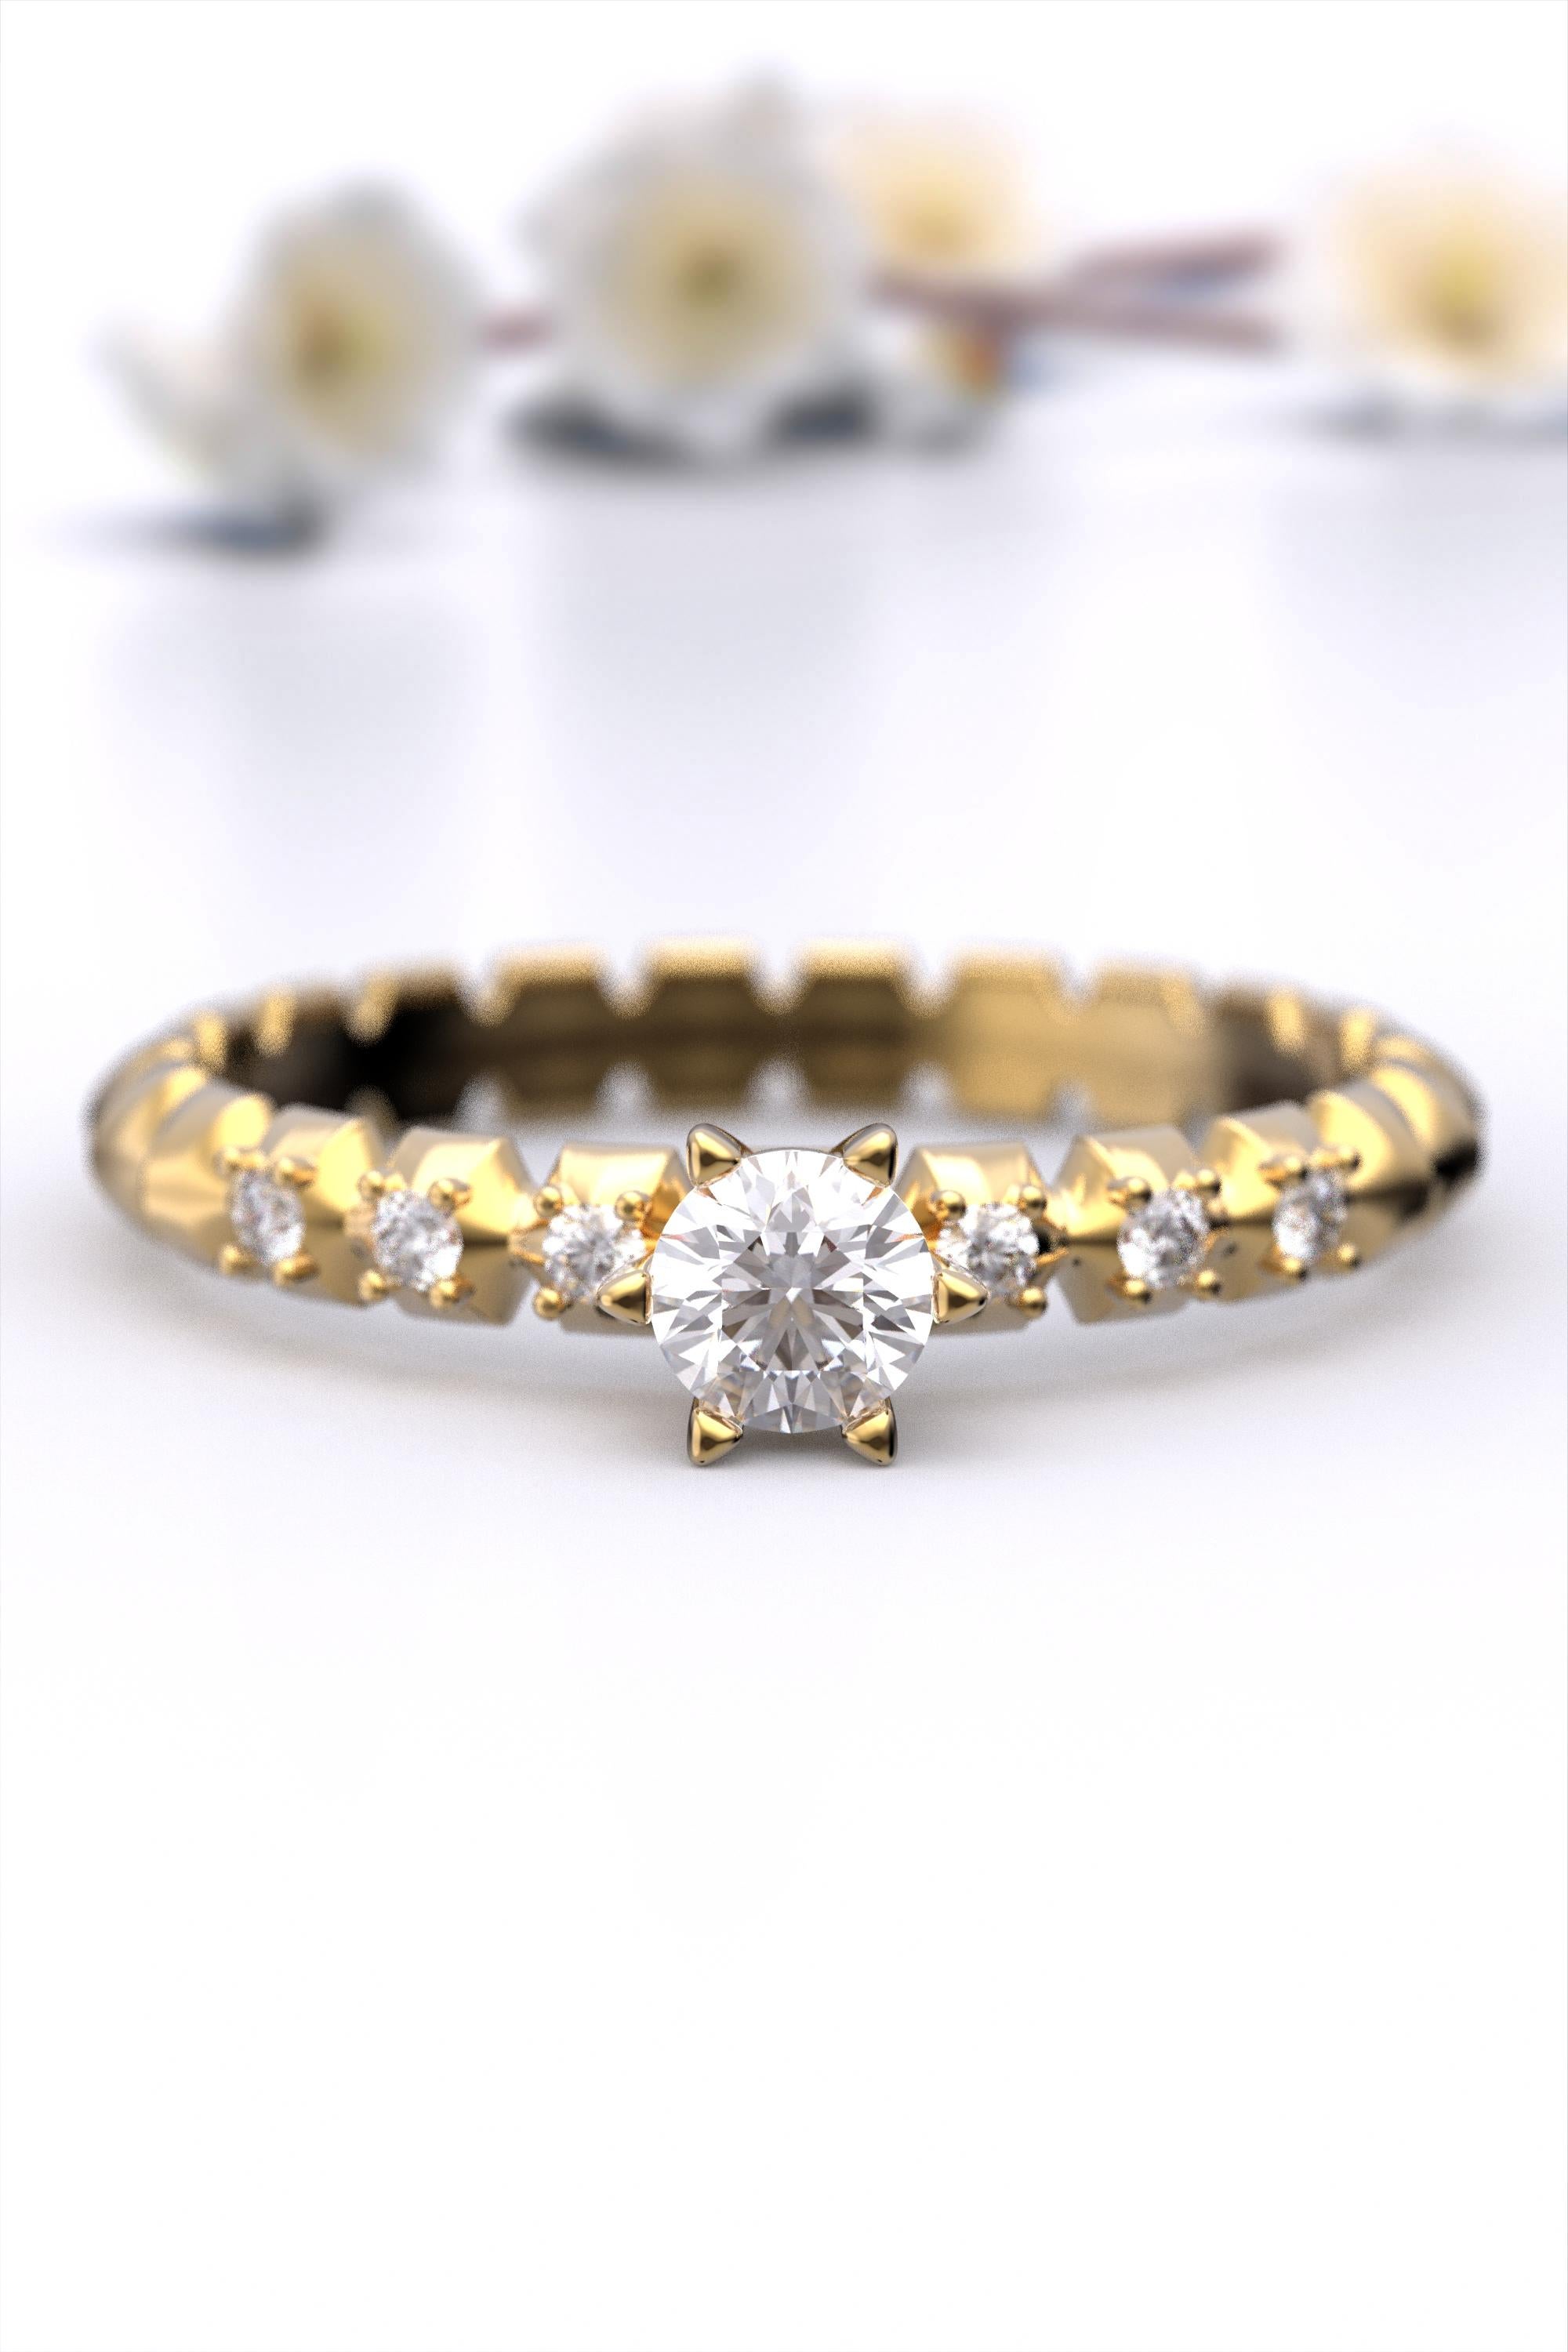 For Sale:  Italian-Made 0.32 Carat Diamond Engagement Ring in 18k Solid Gold 4